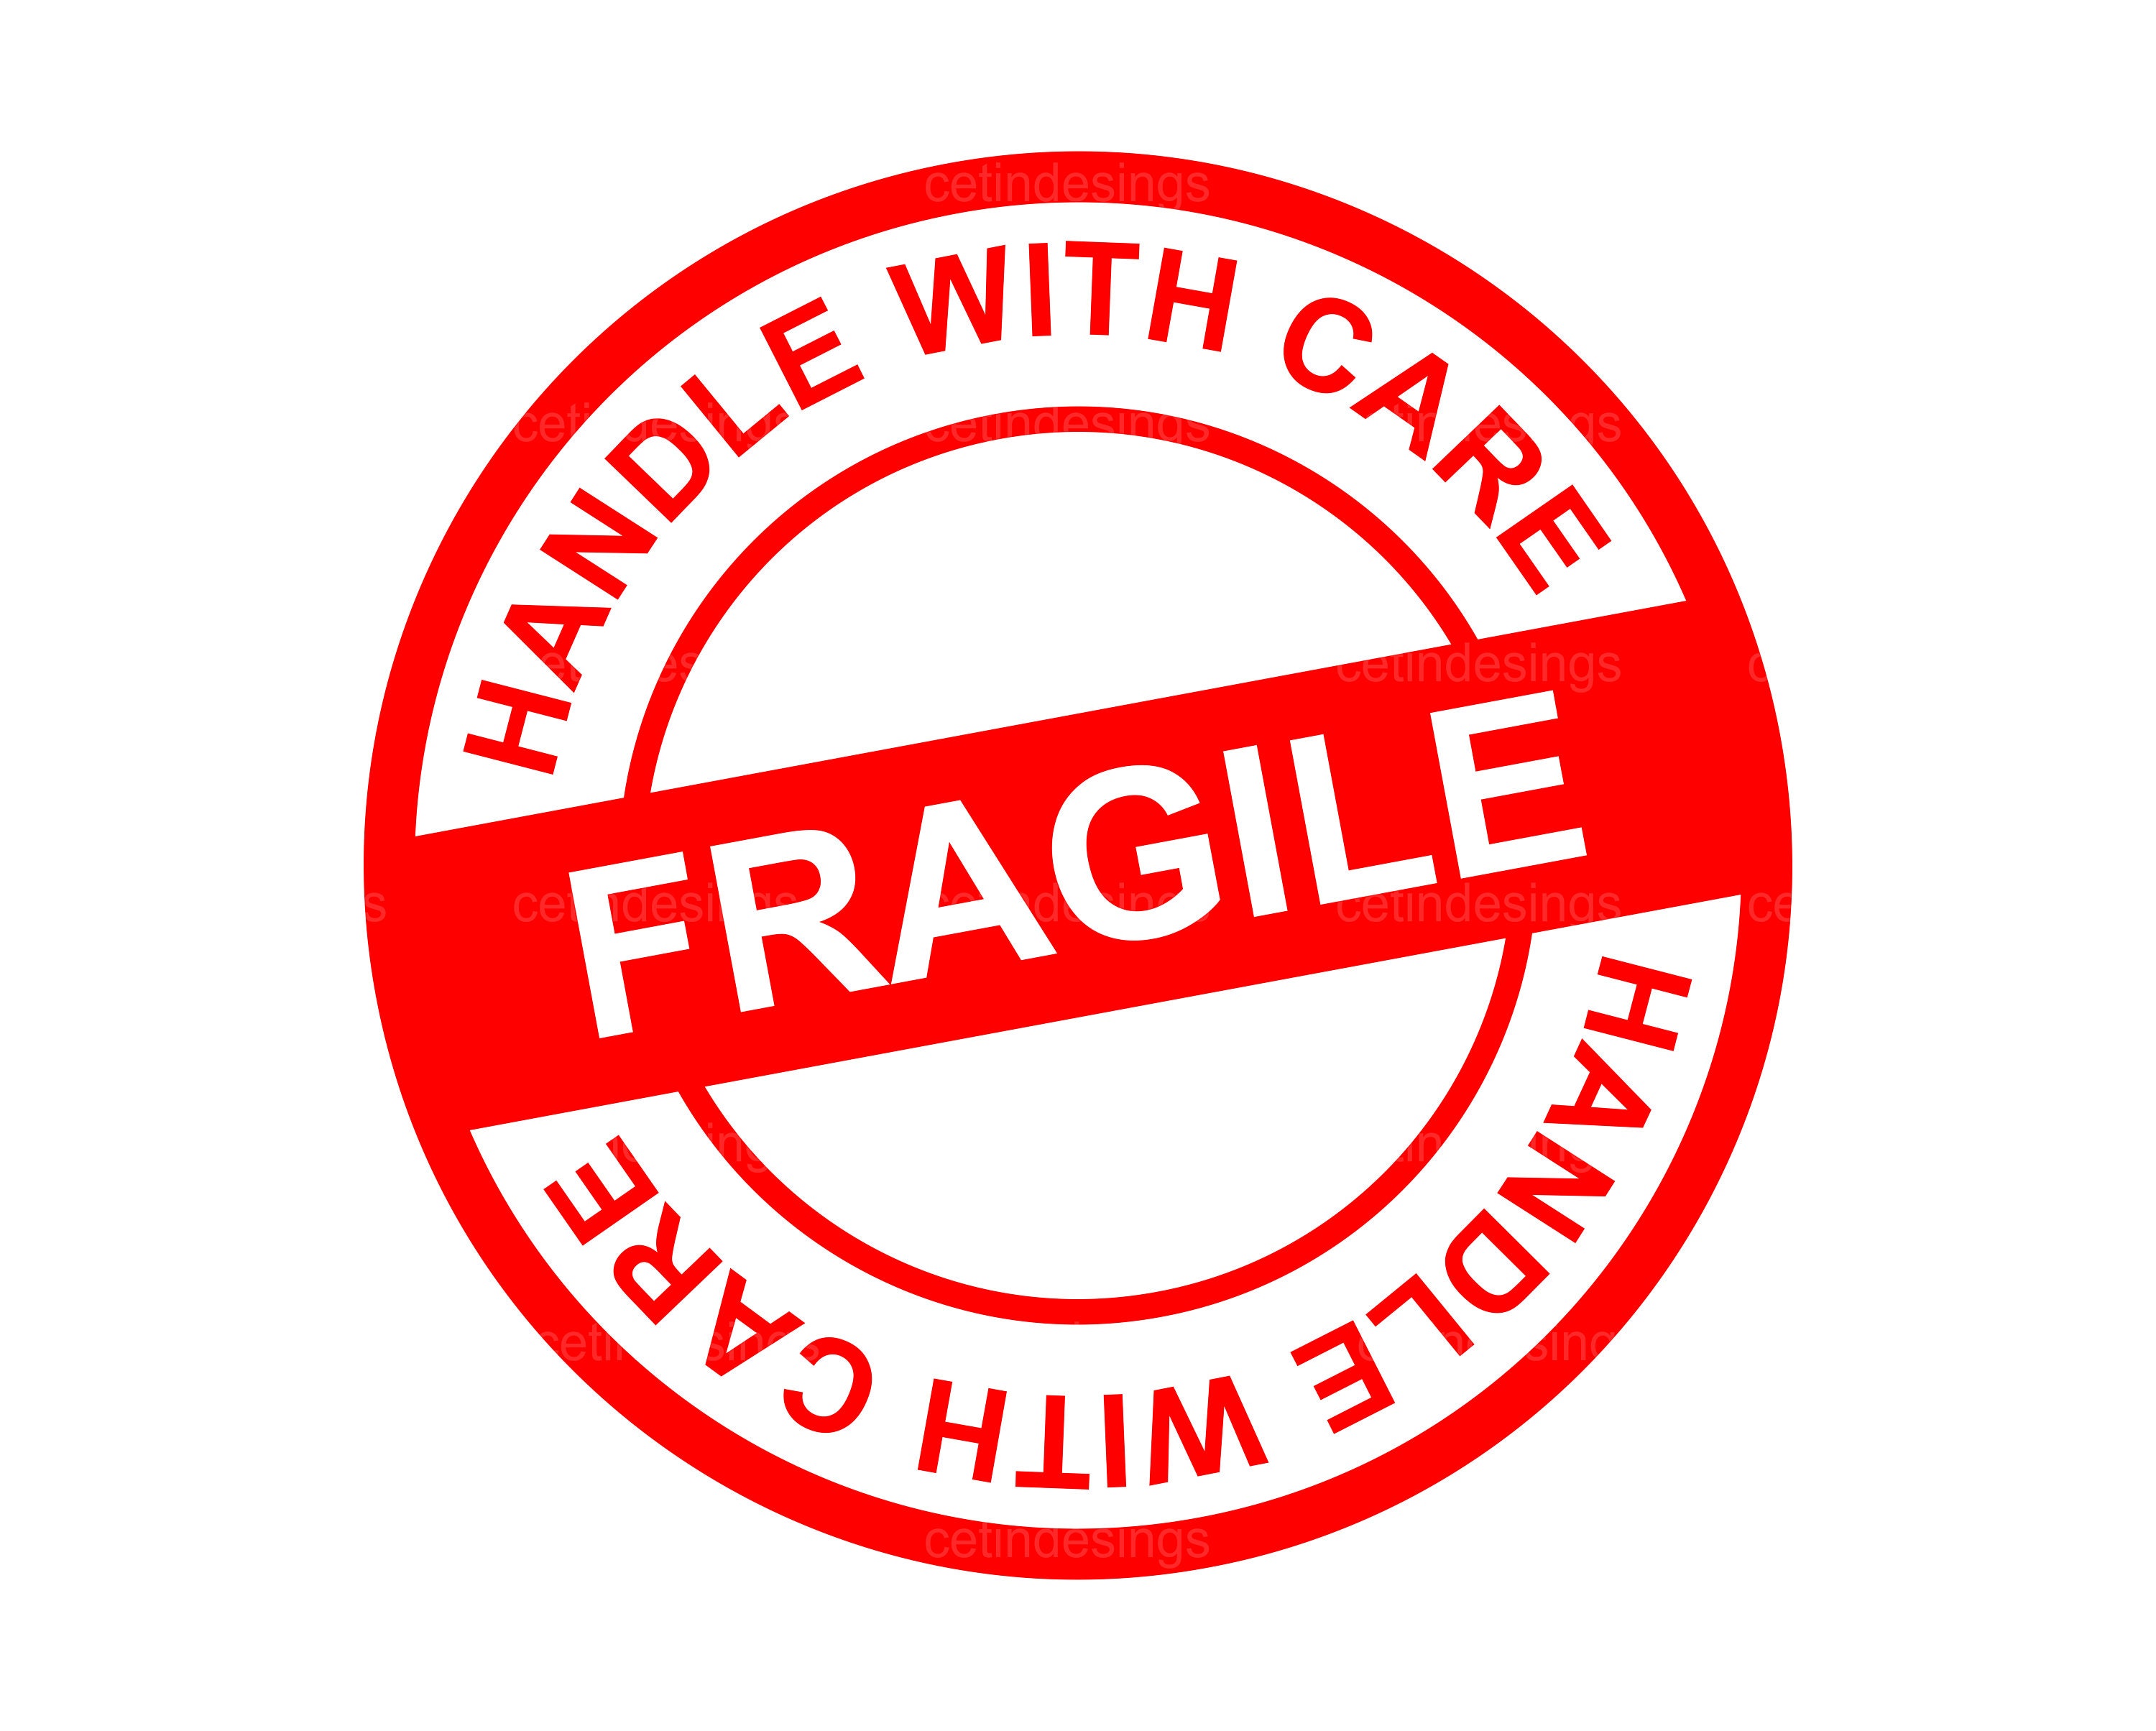 Best of Fragile handle with care xxx